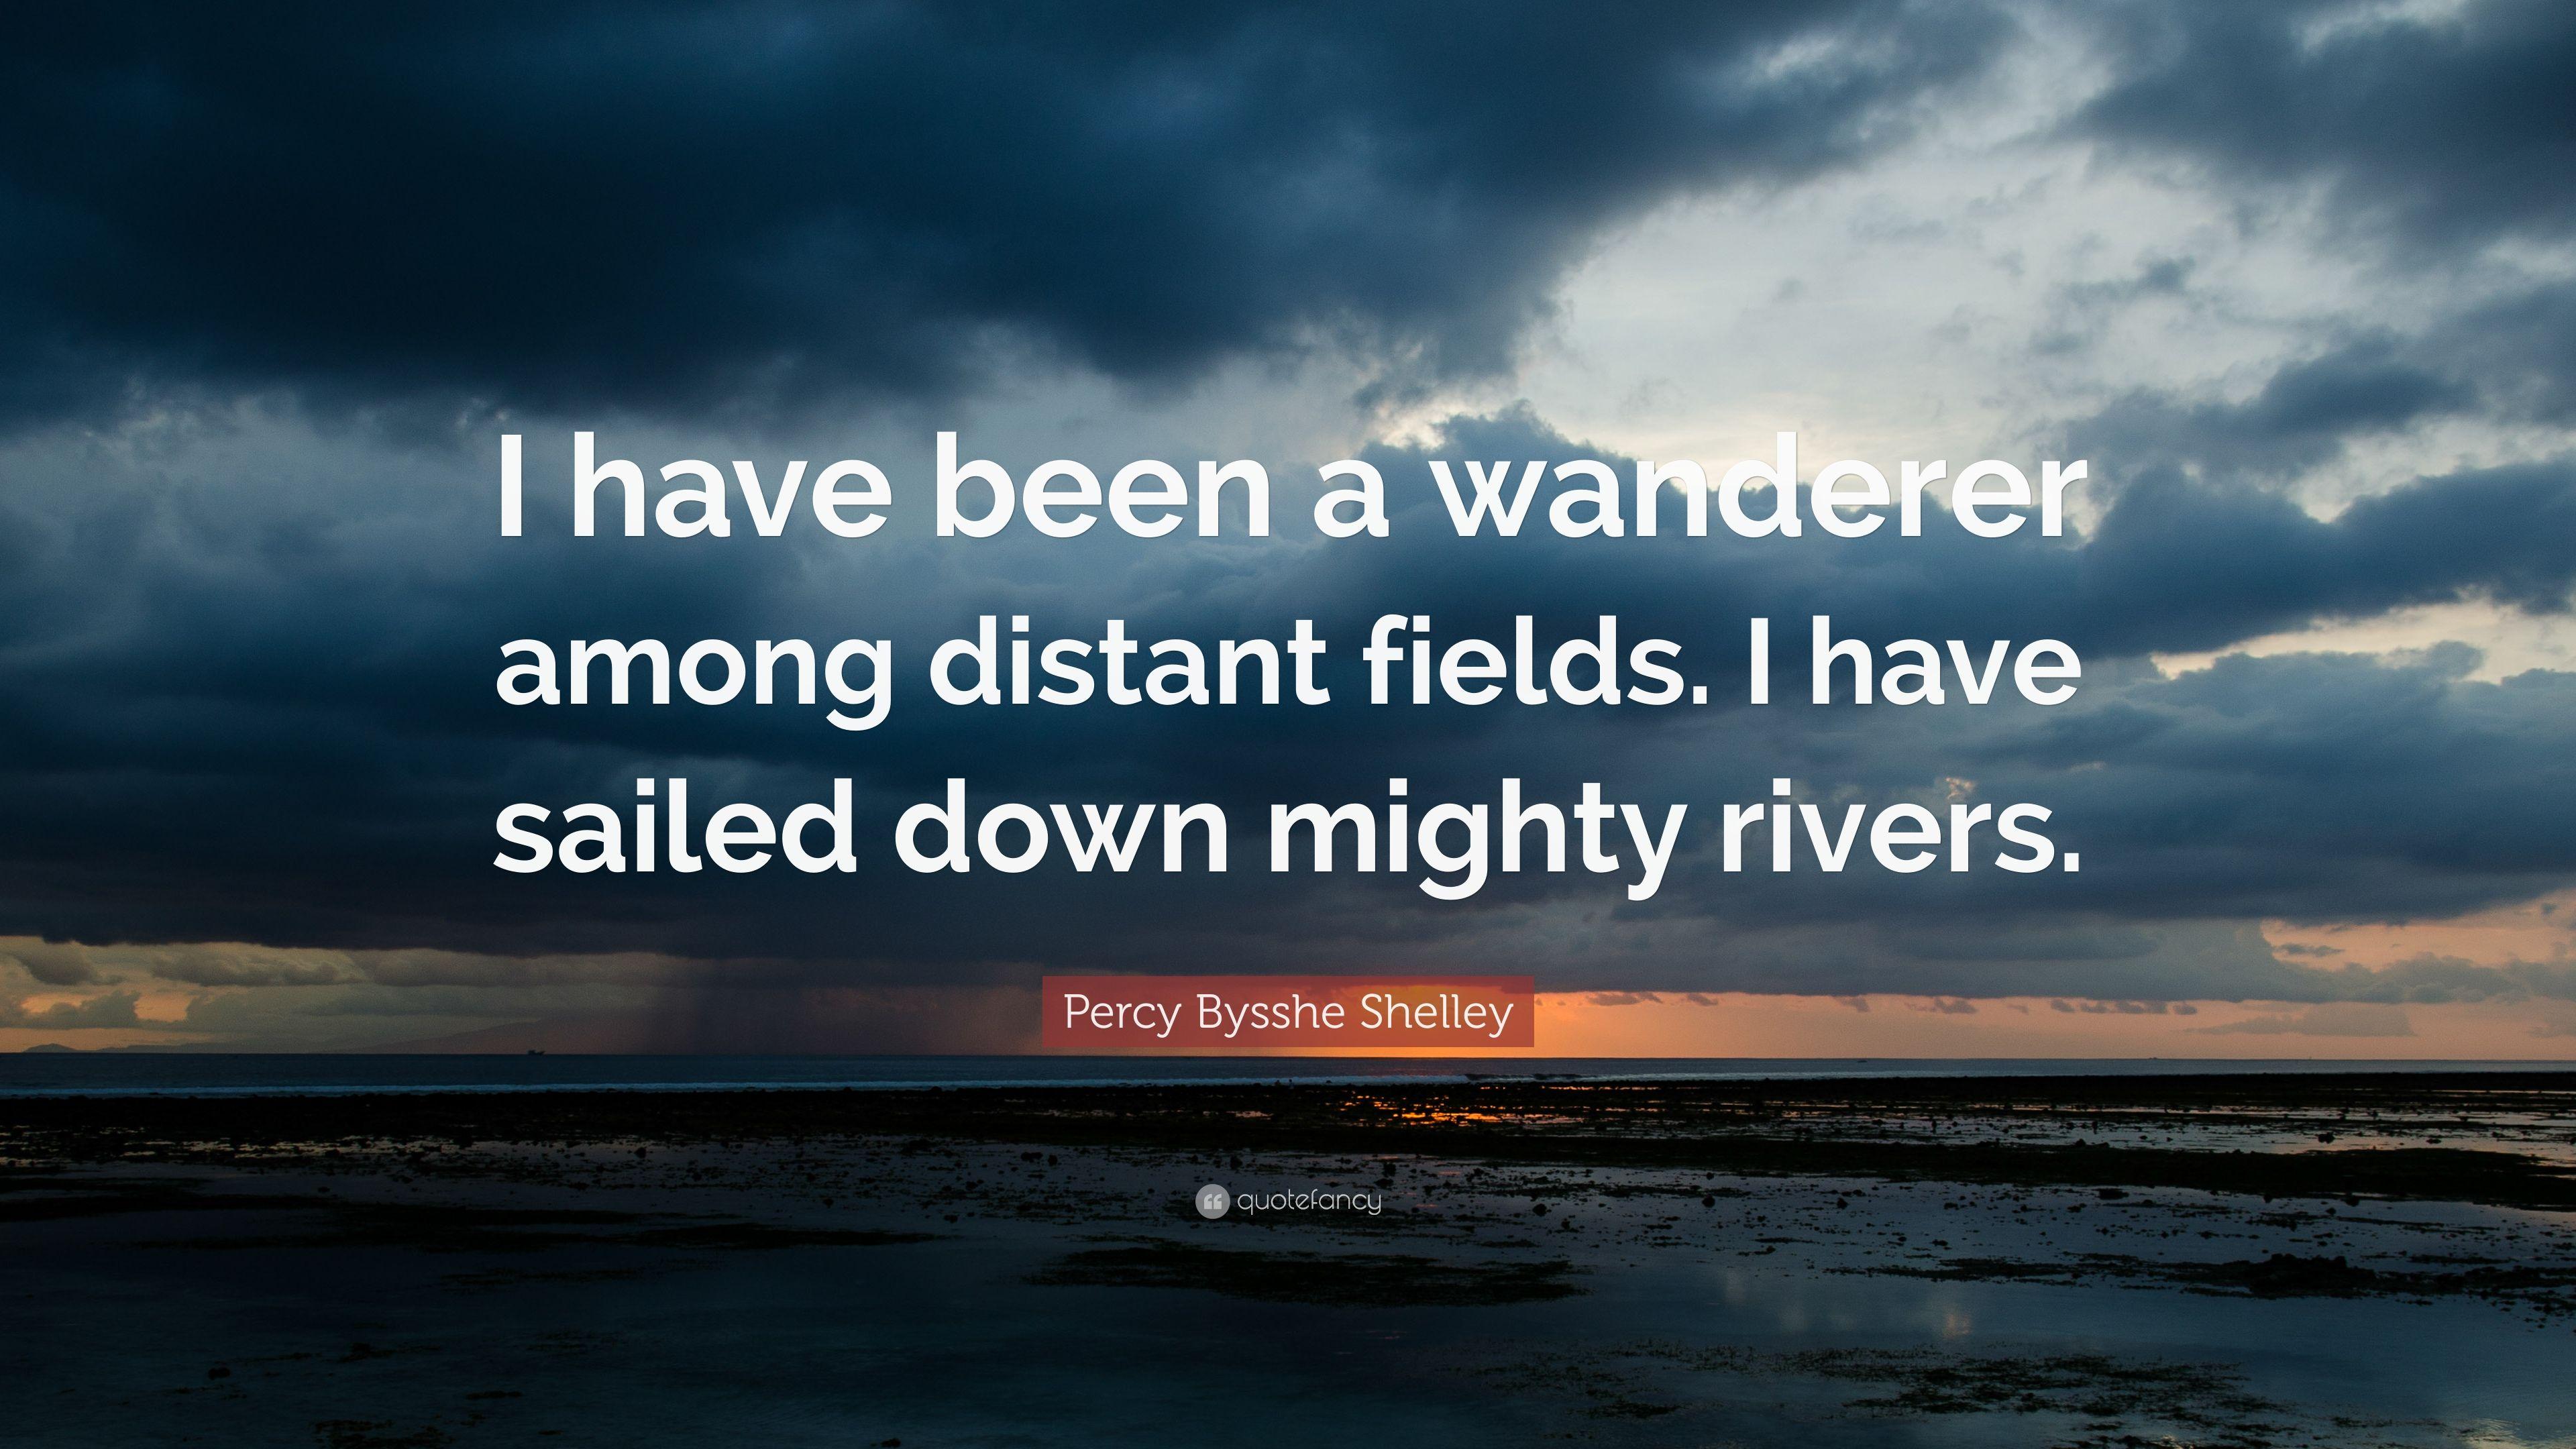 Percy Bysshe Shelley Quote: “I have been a wanderer among distant